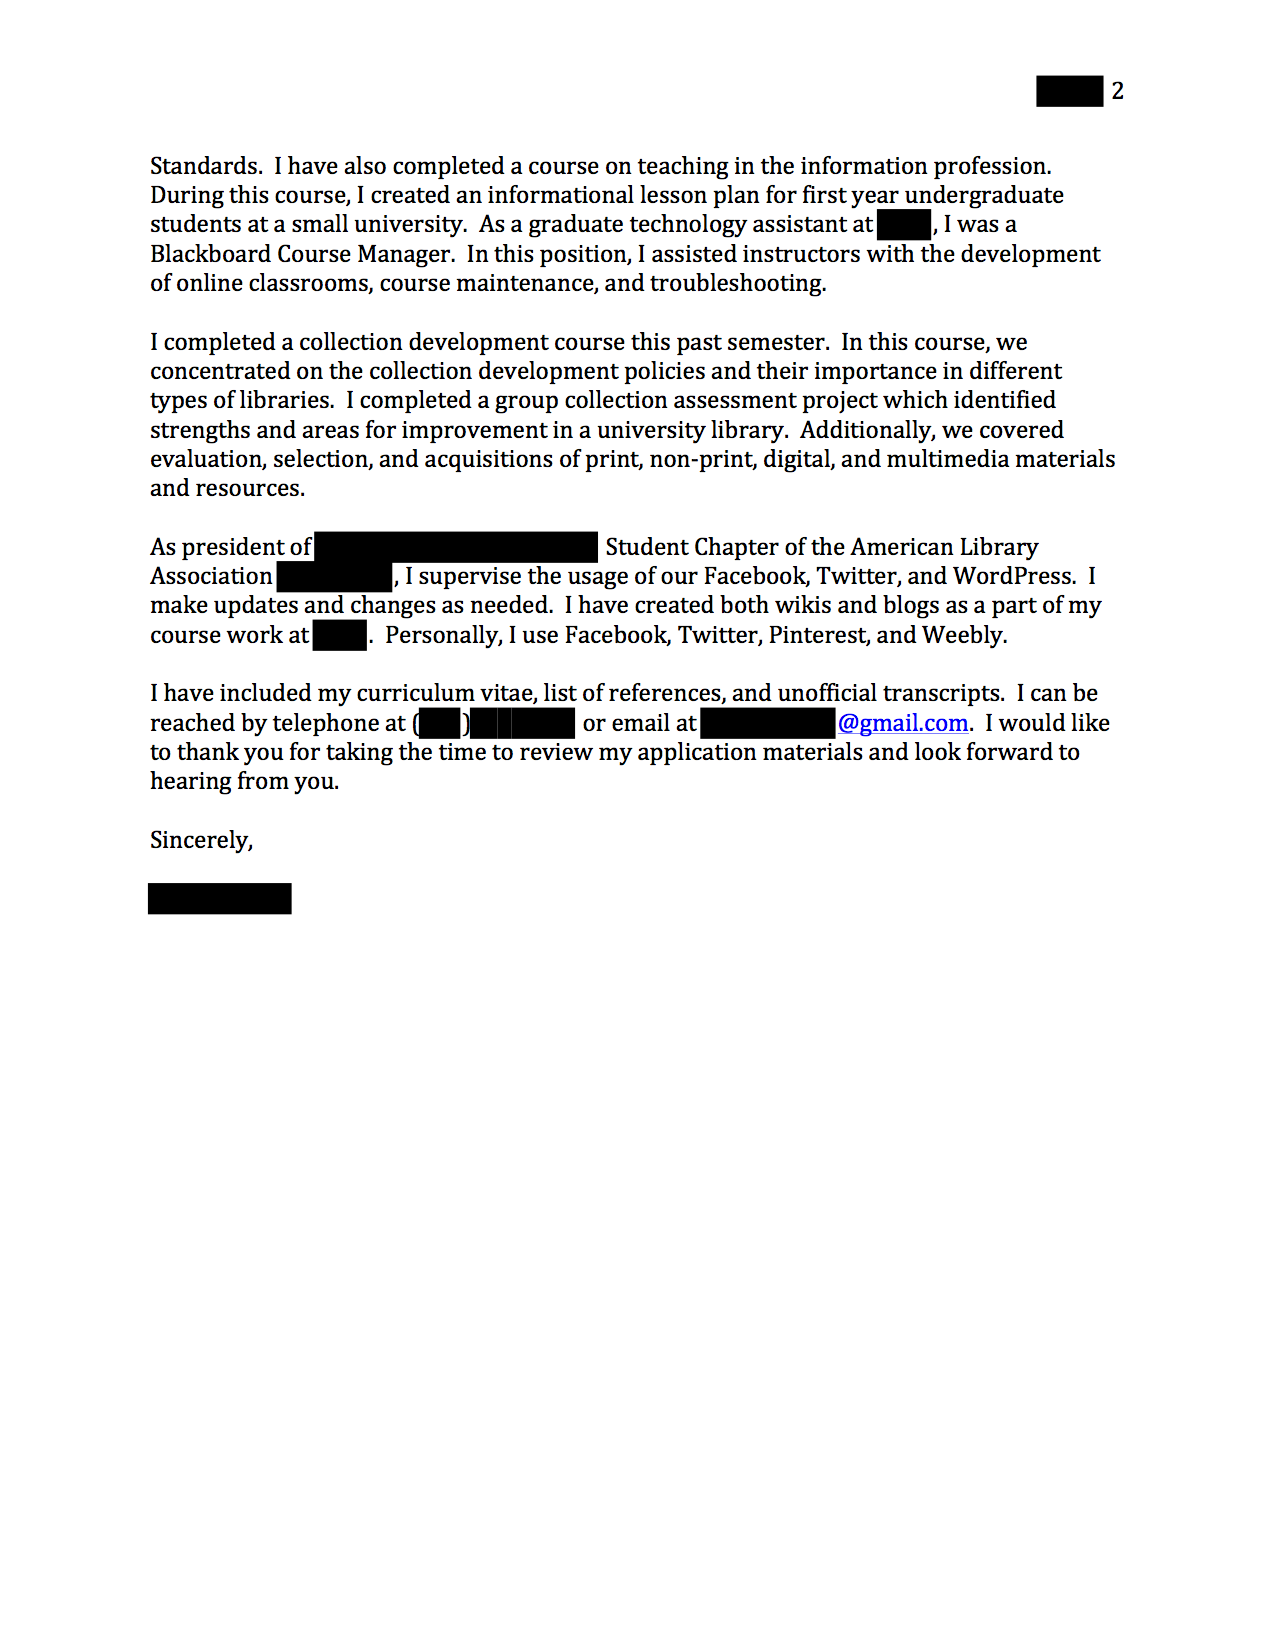 cover letter to alma mater example